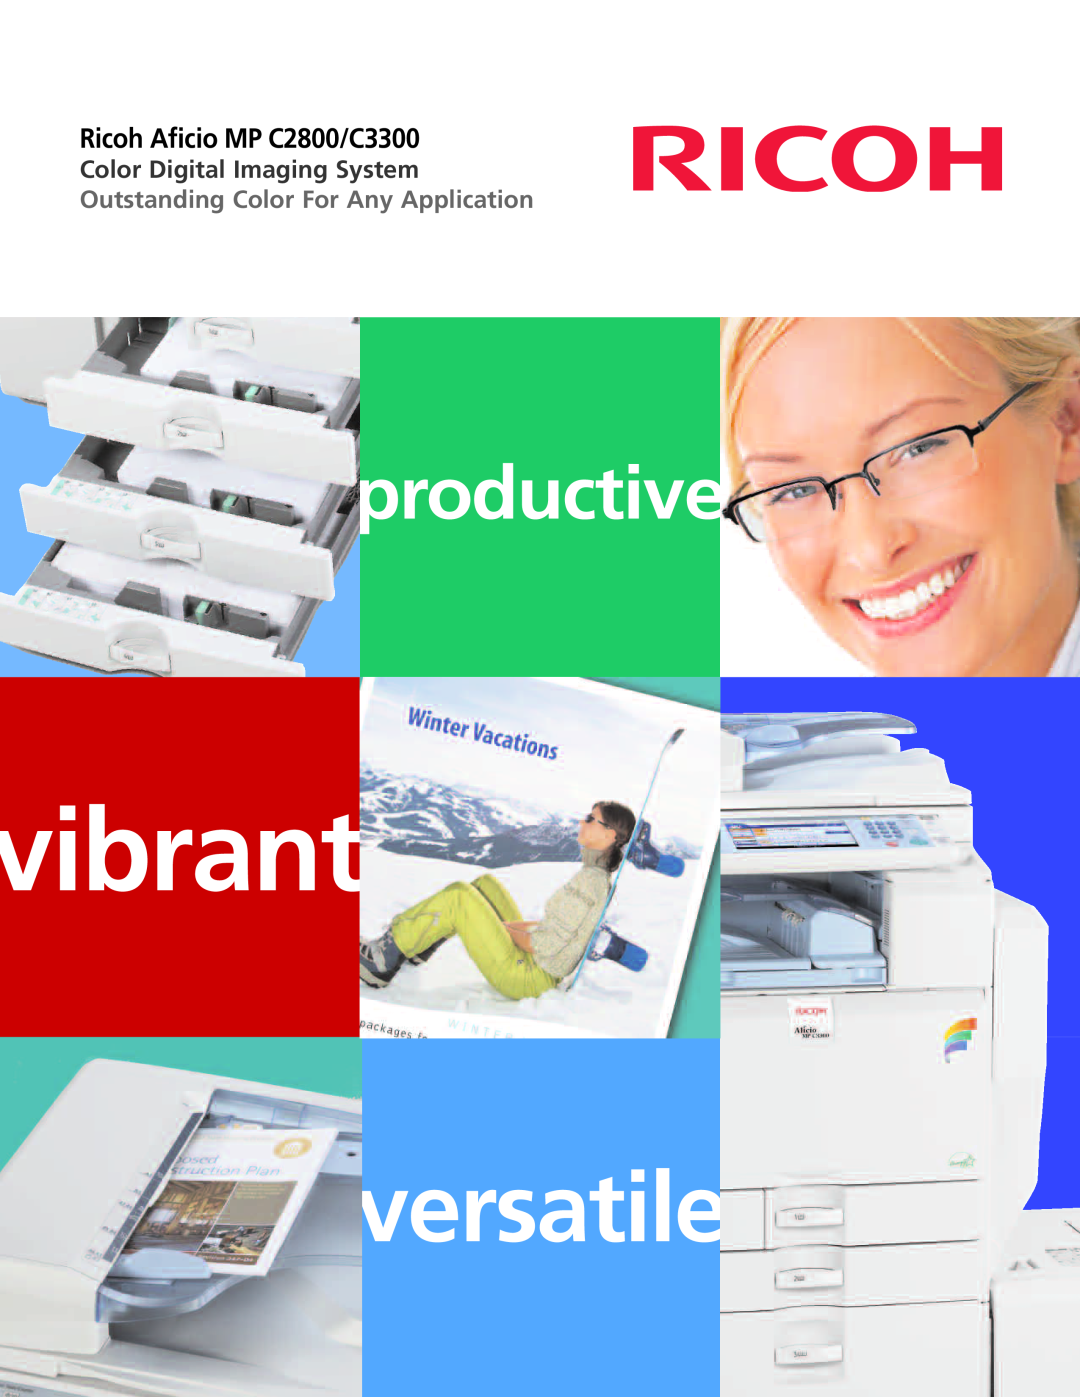 Ricoh MP C2800 manual vibrant, versatile, productive, Color Digital Imaging System, Outstanding Color For Any Application 